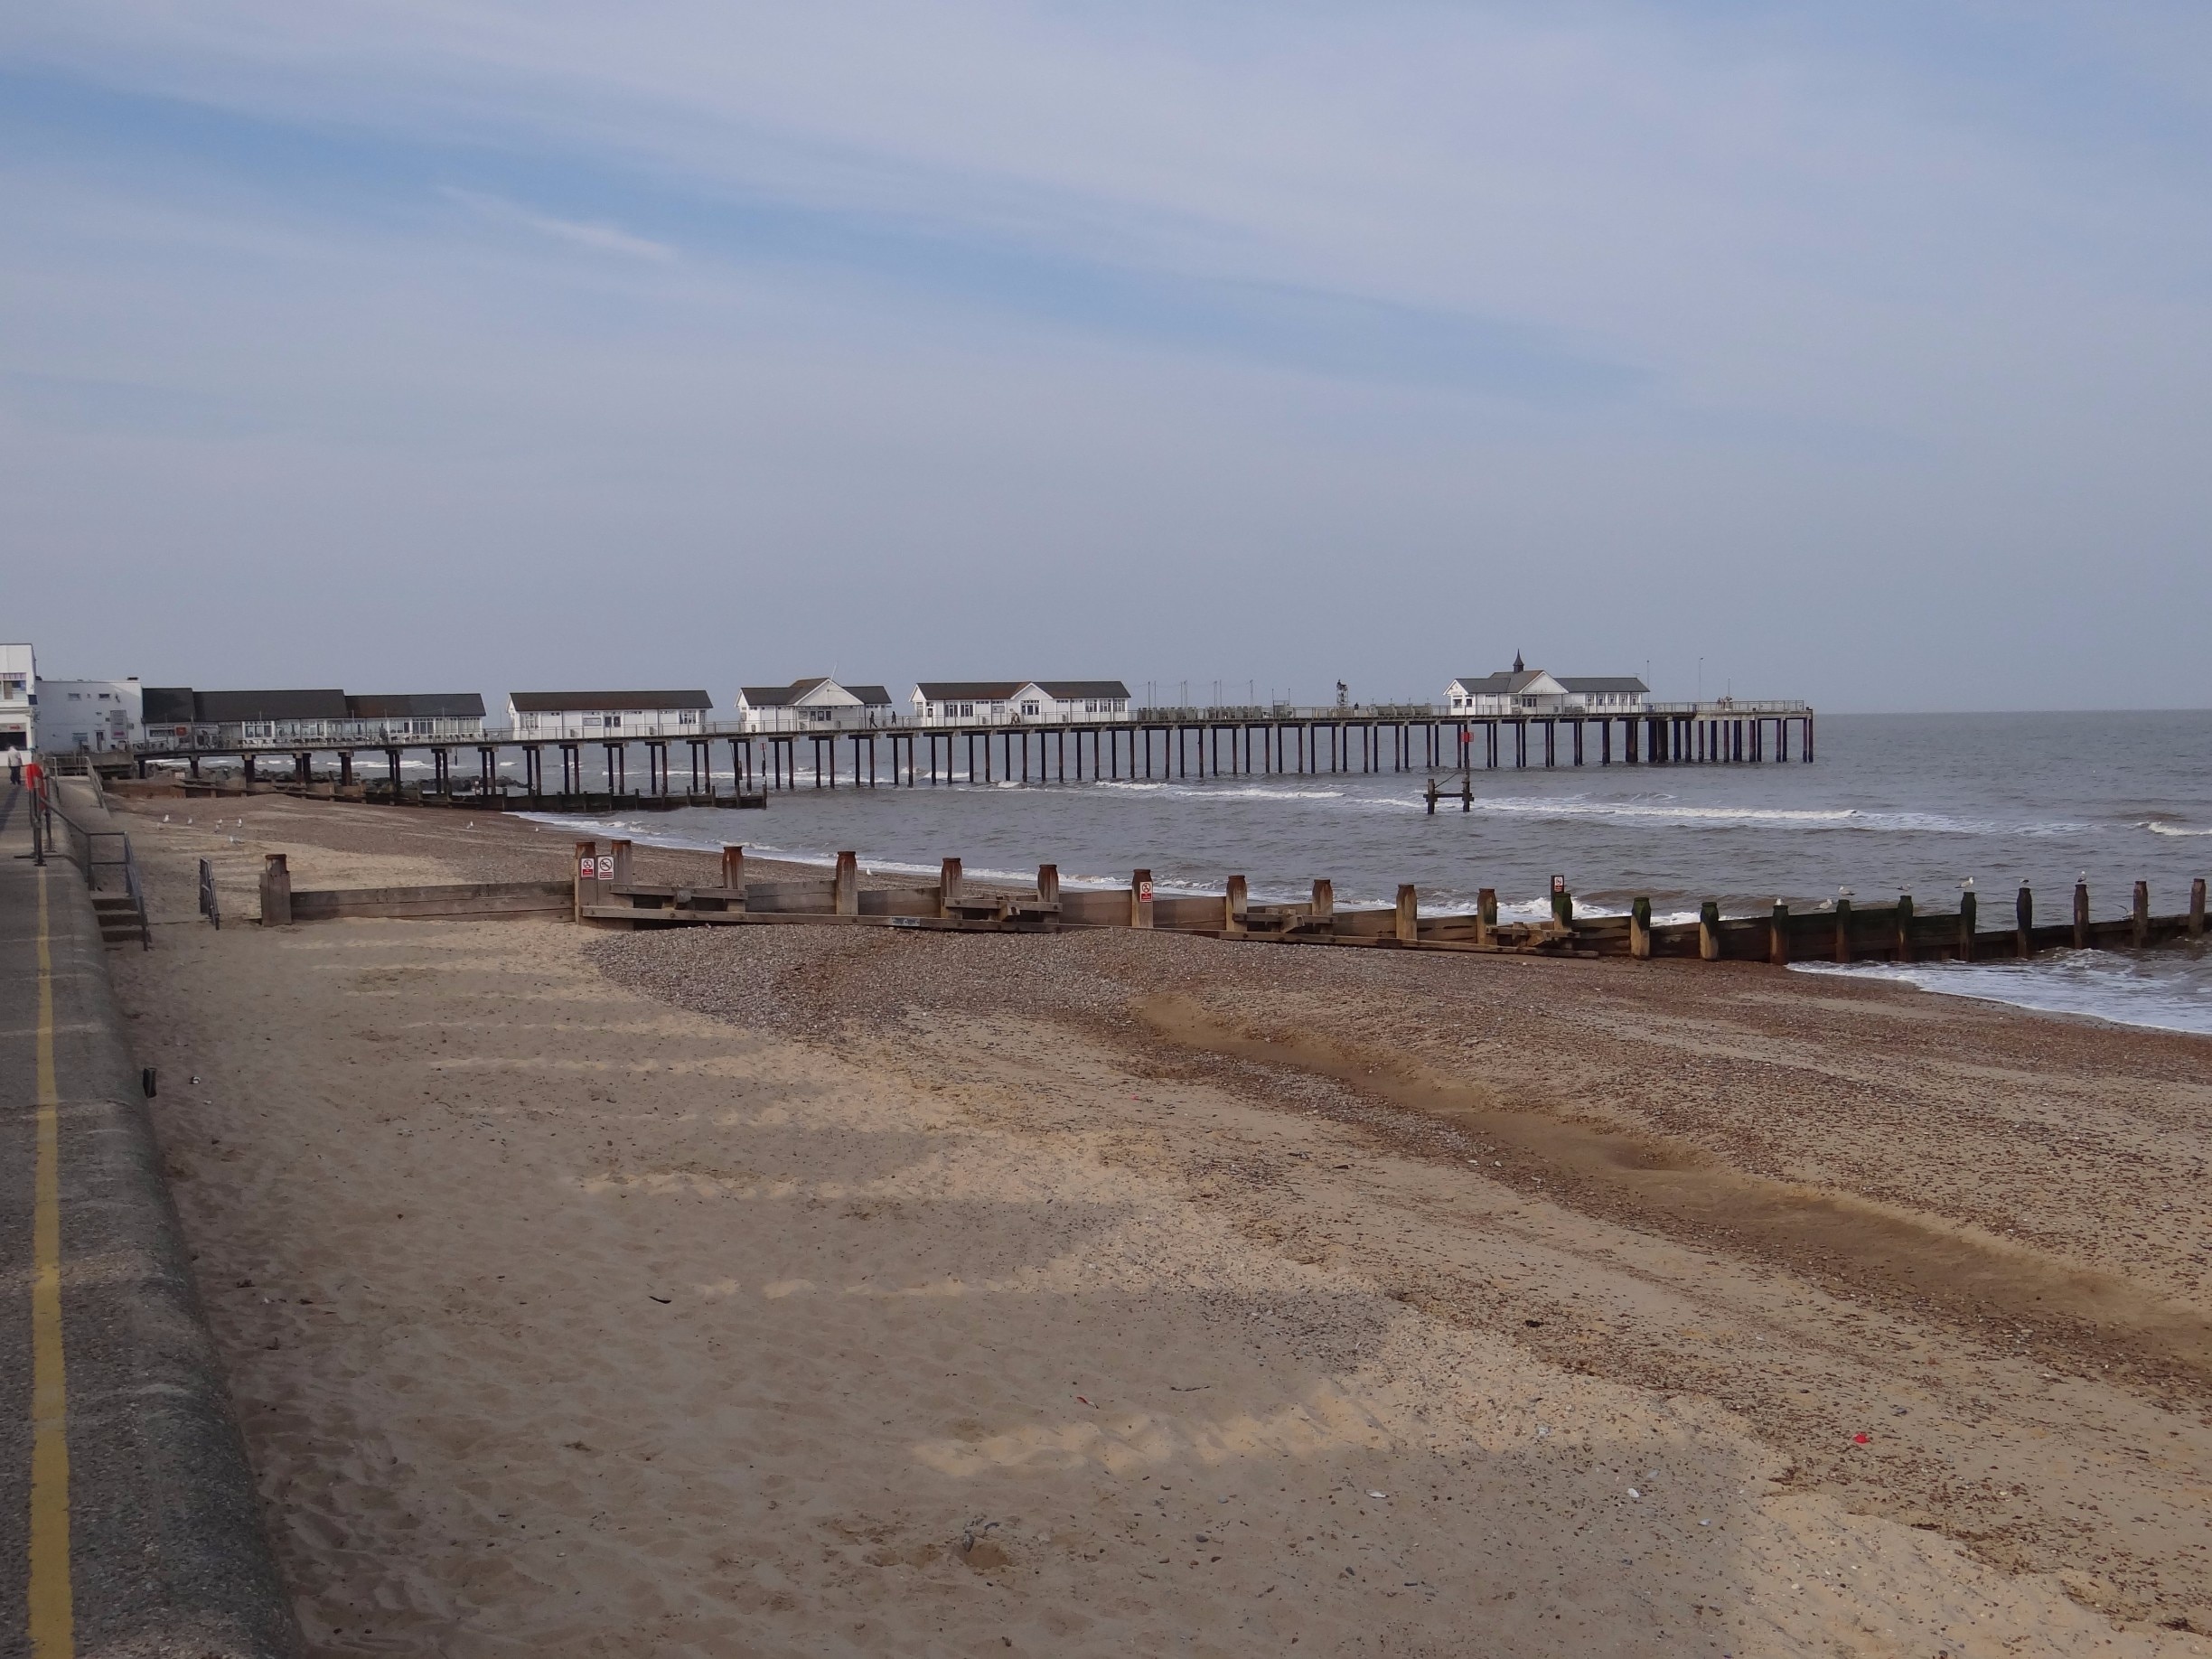 #TakeAHike to Southwold Pier